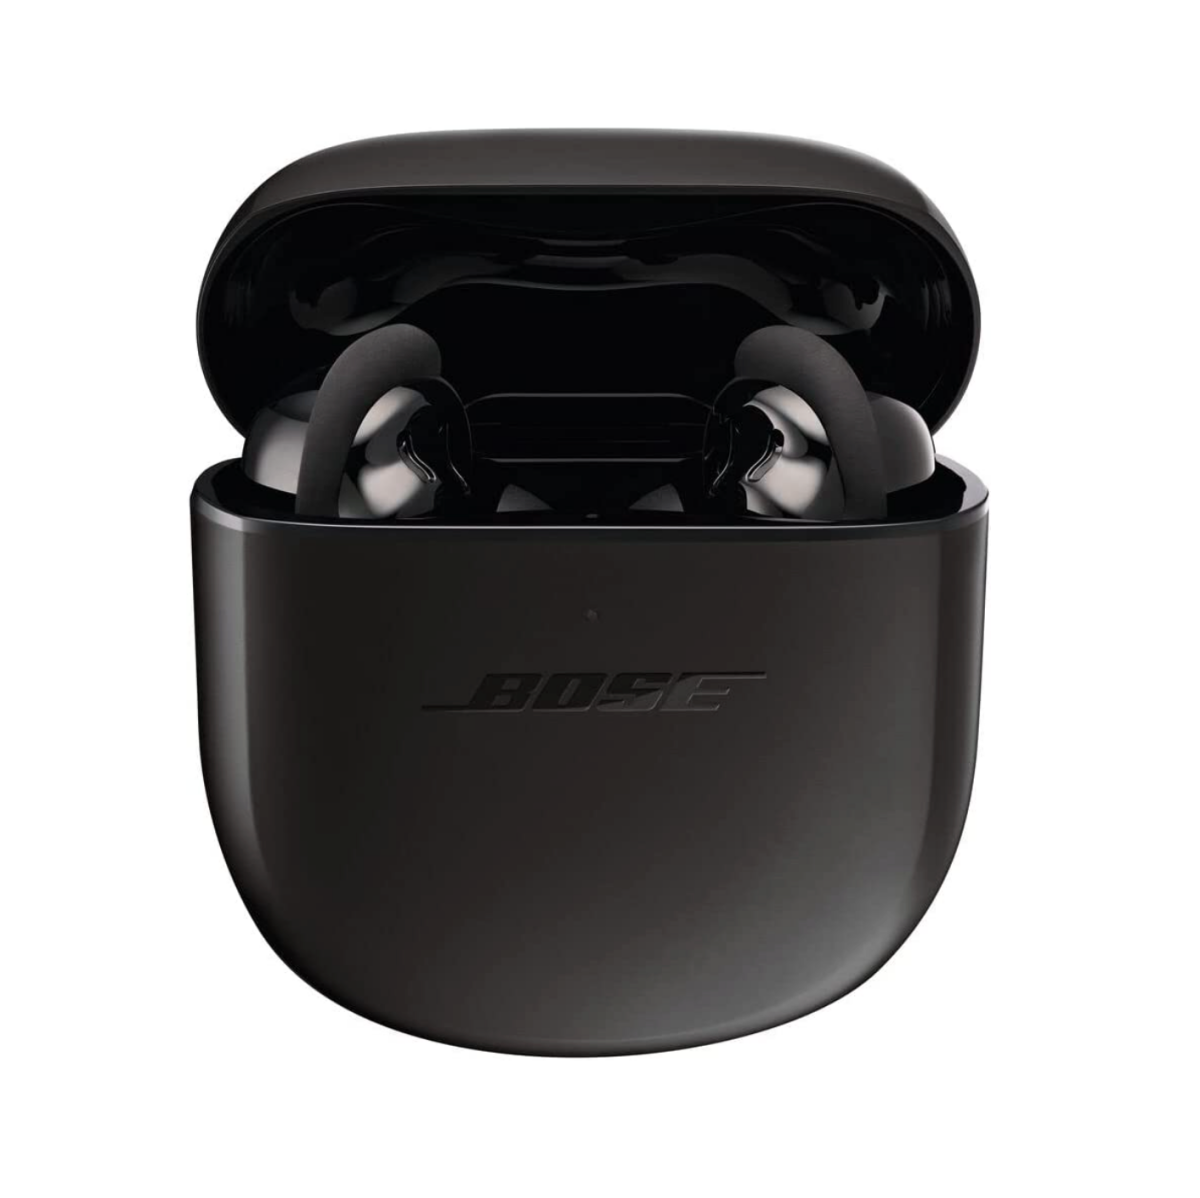 A pair of Bose QuietComfort Noise-Canceling Earbuds II in their charging case